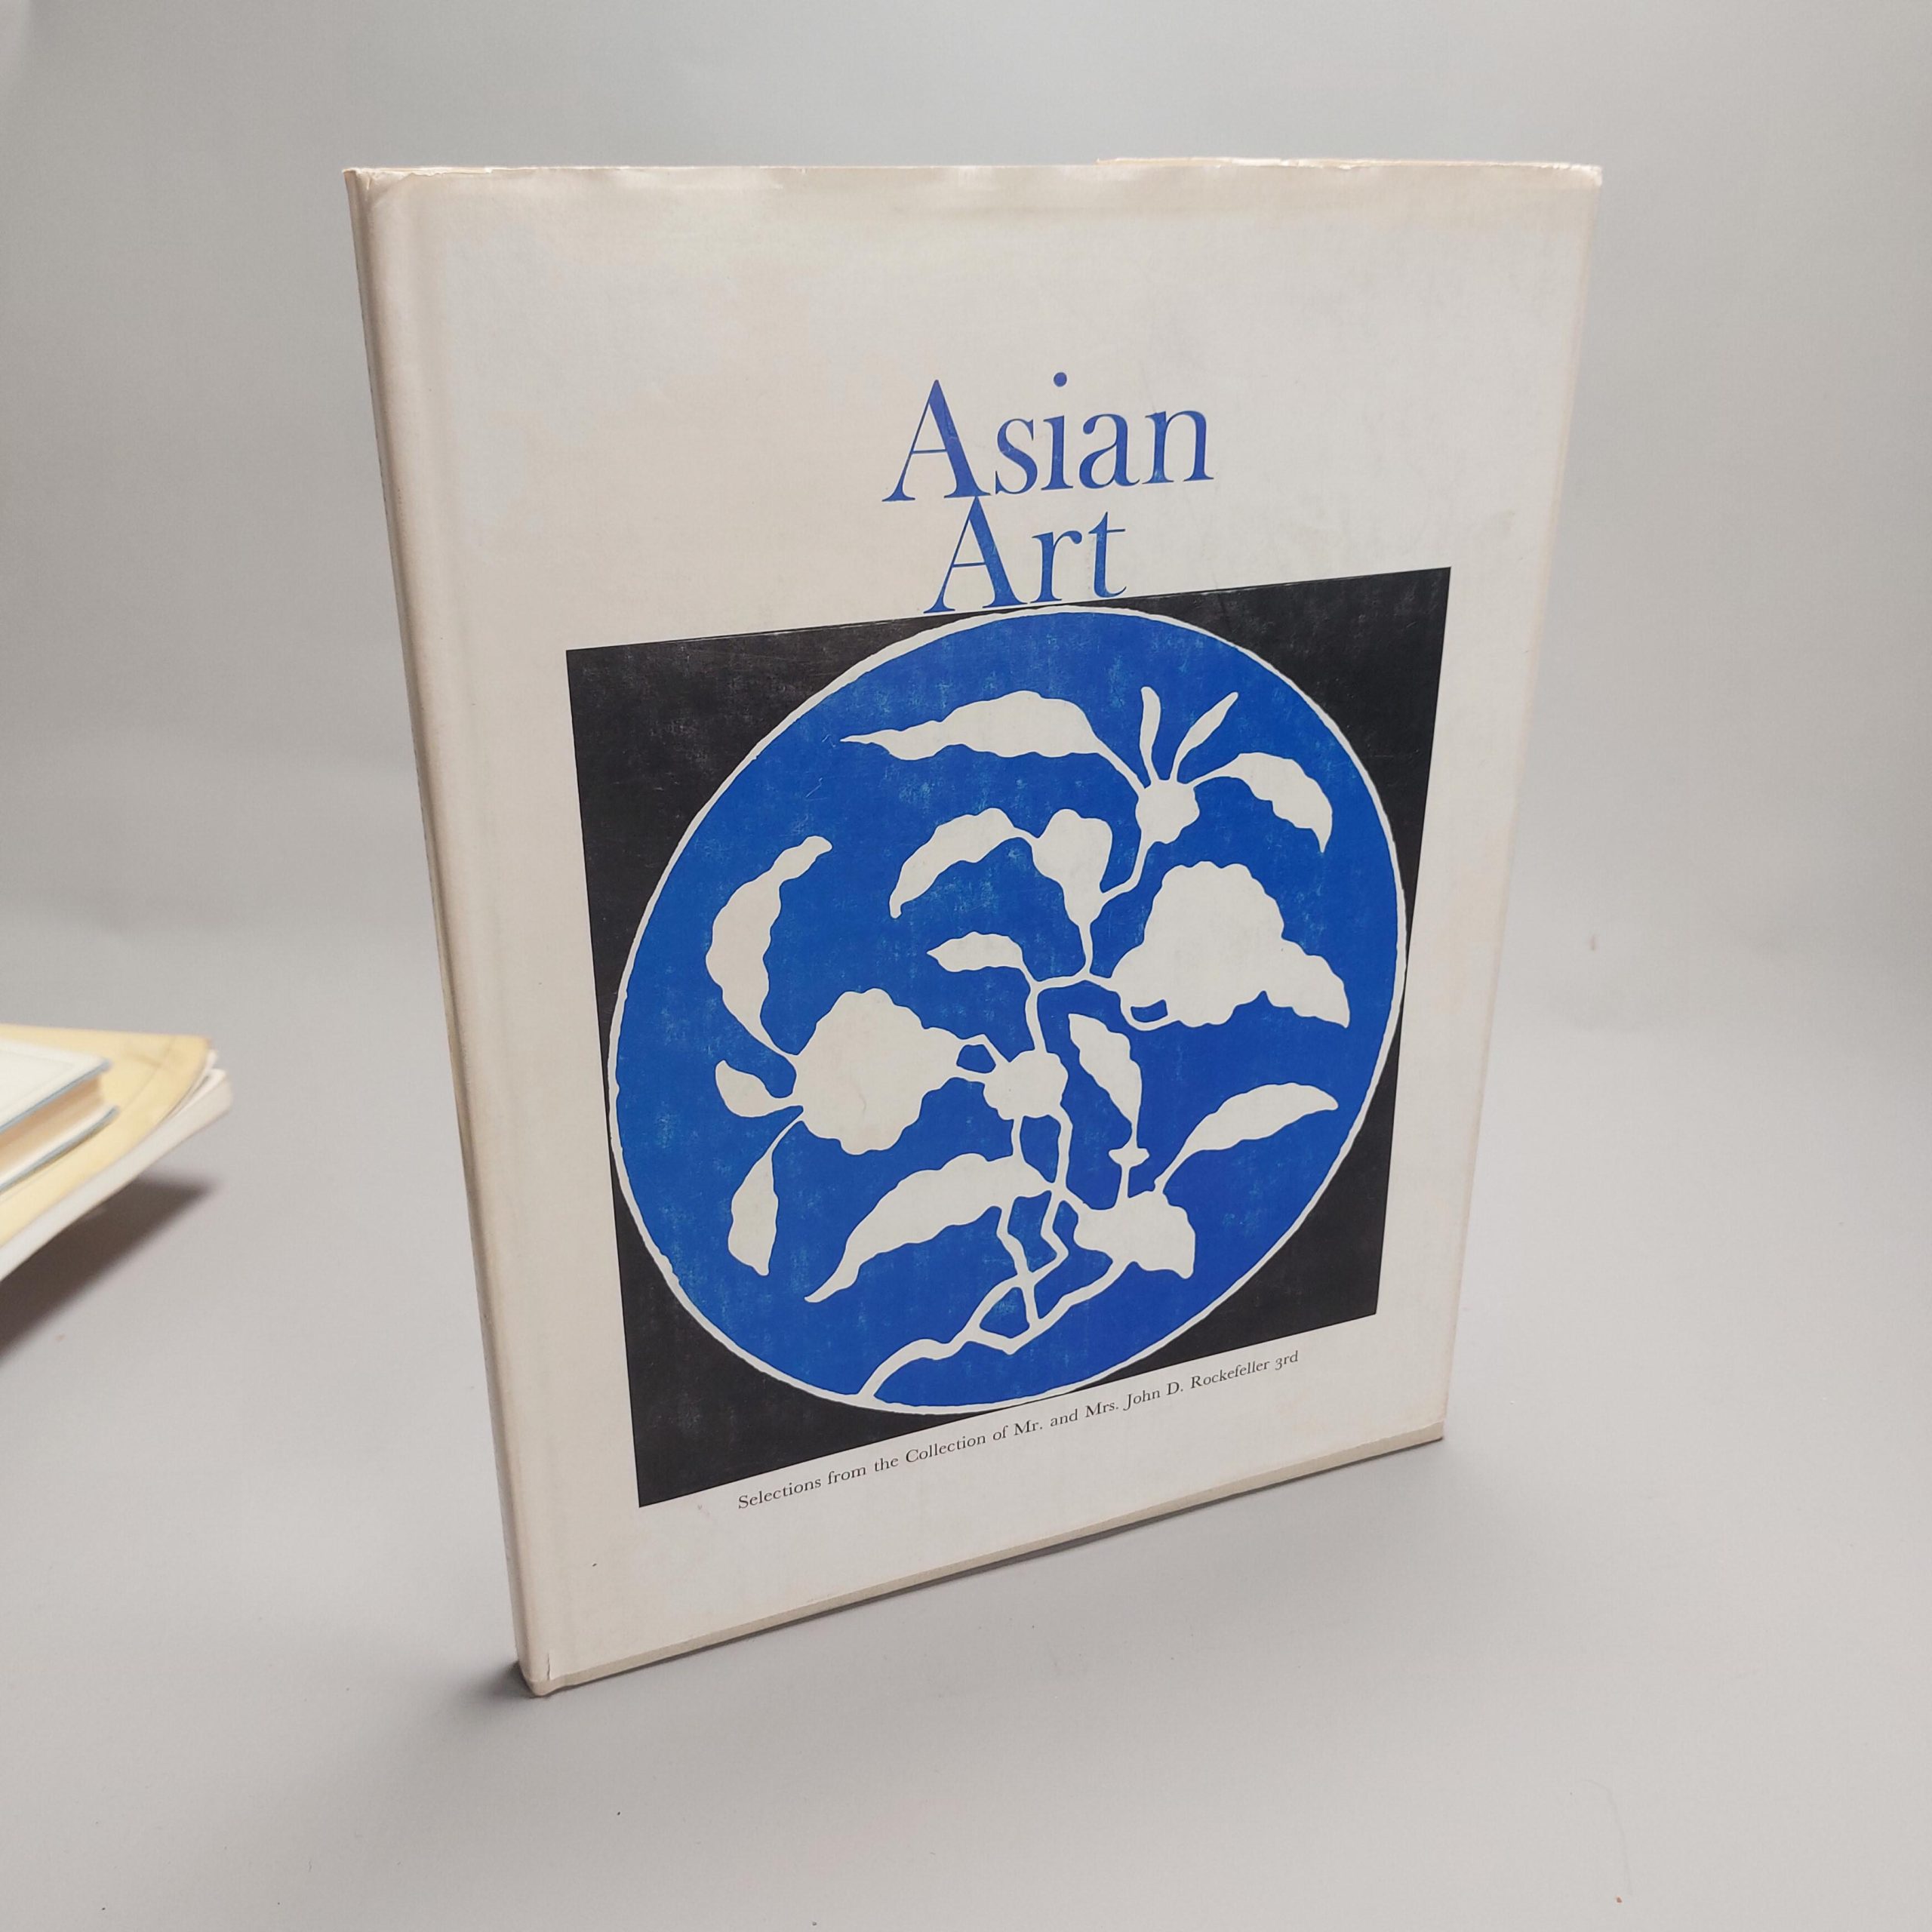 Reference Book Chinese Art –  Asian Art: Selections from the Collection Rockefeller